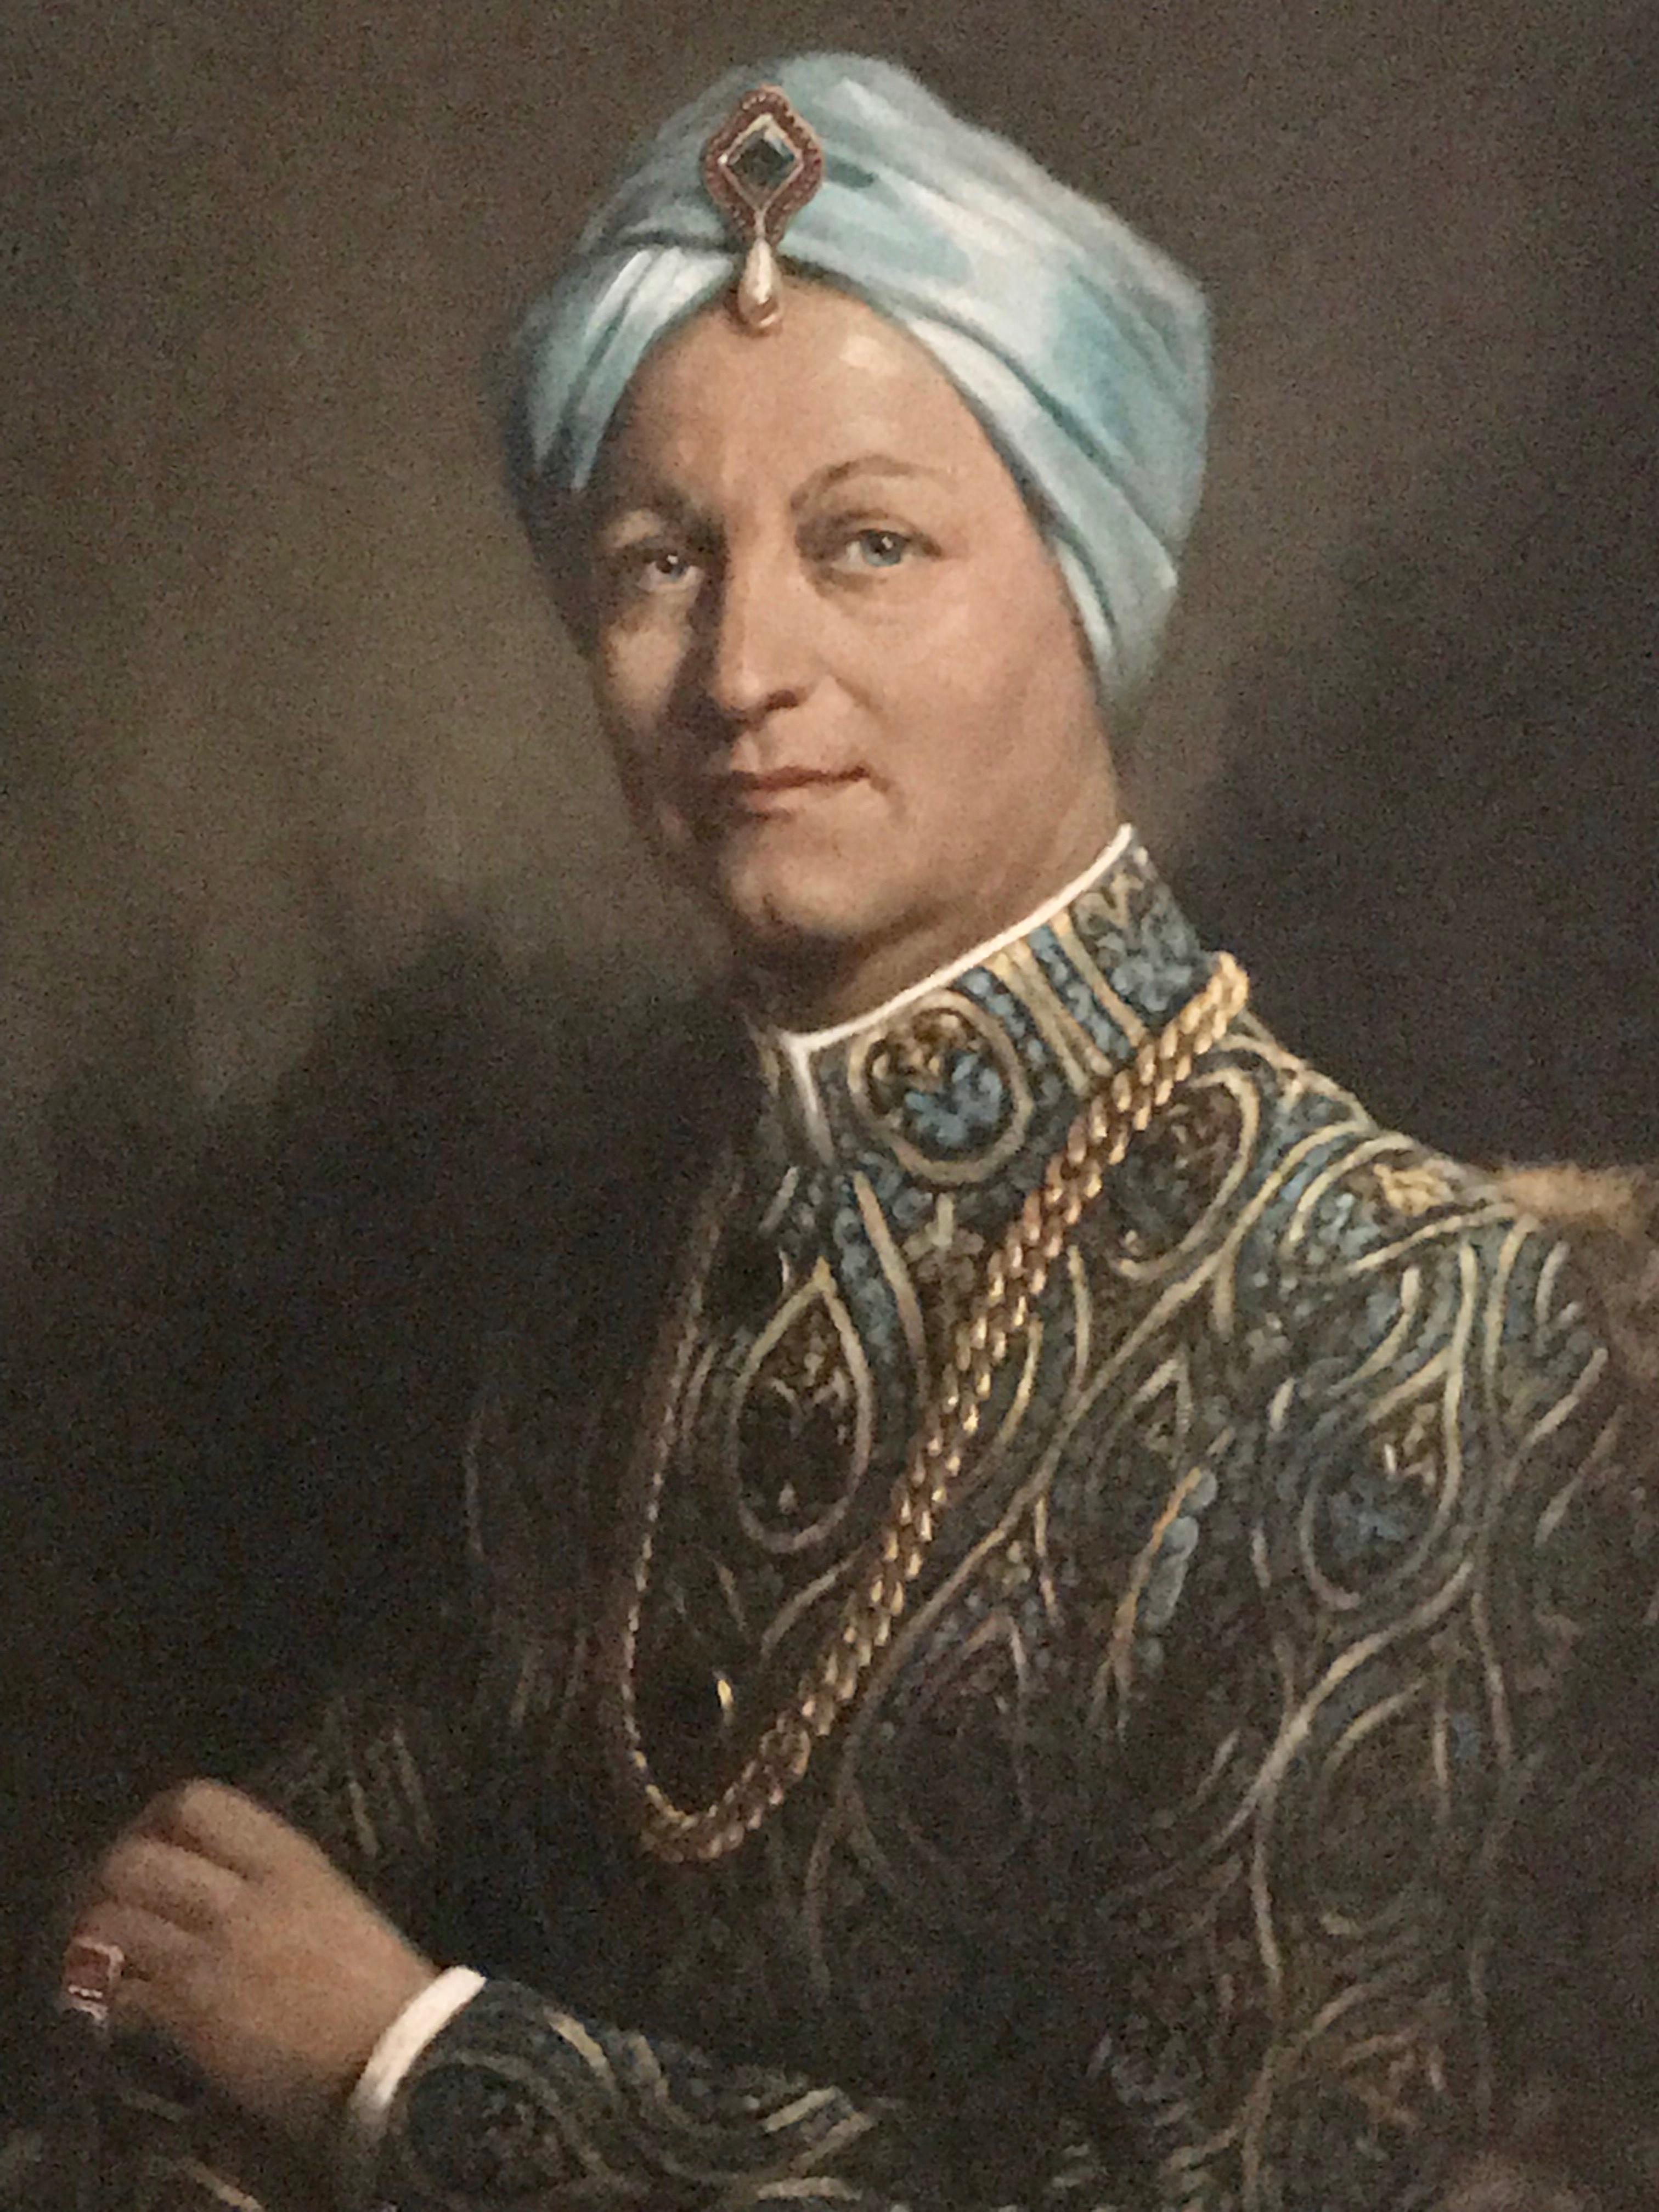 A large chic and unusual oil on canvas portrait of a European gentleman dressed in traditional Indian Raj clothing (a la Yves Saint Laurent)
The original artisanal carved wood frame with turquoise painted carved geometric details complete the